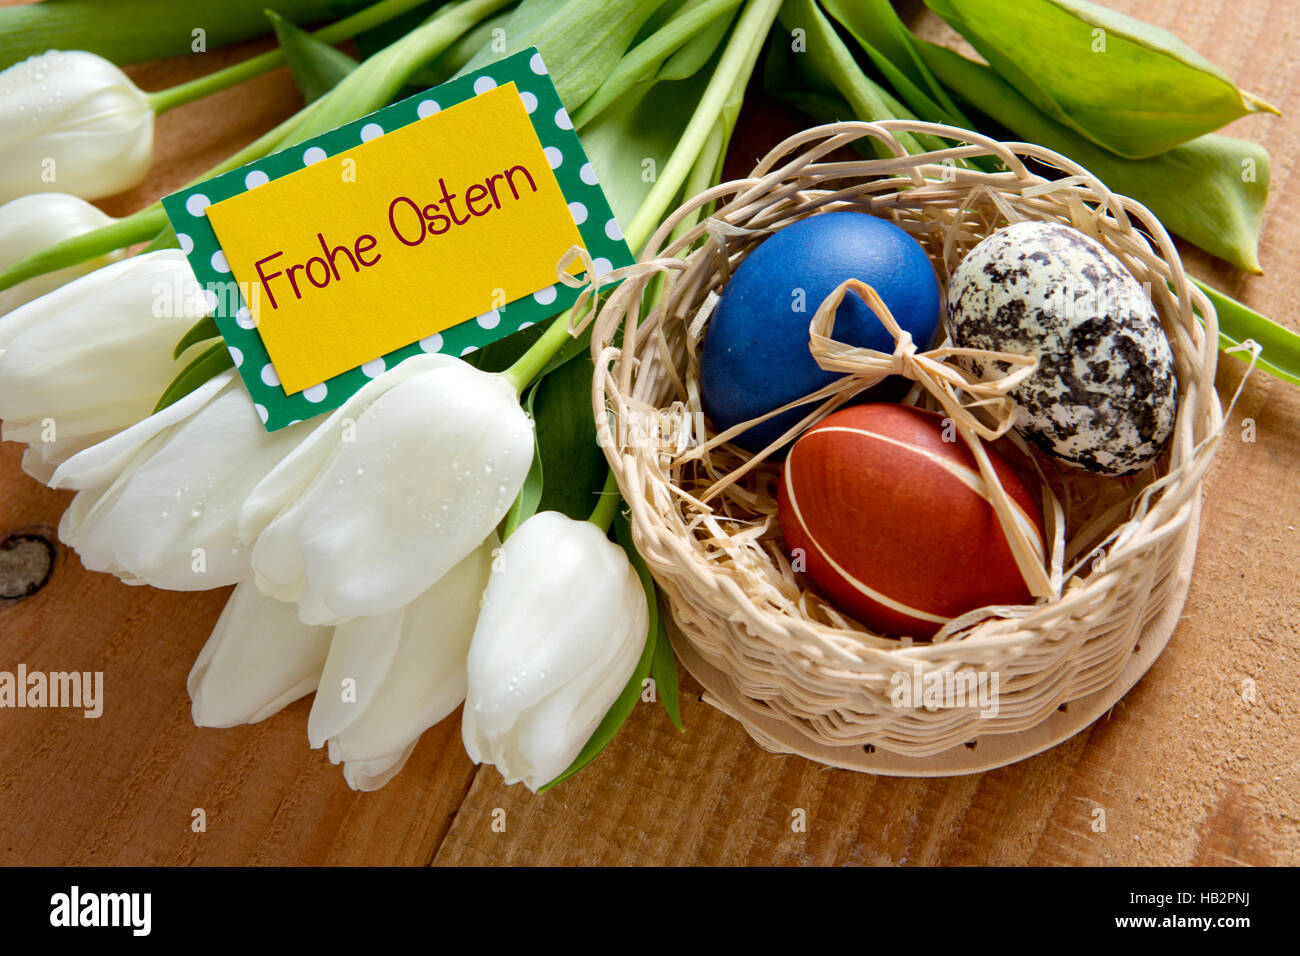 Frohe Ostern card. Stock Photo